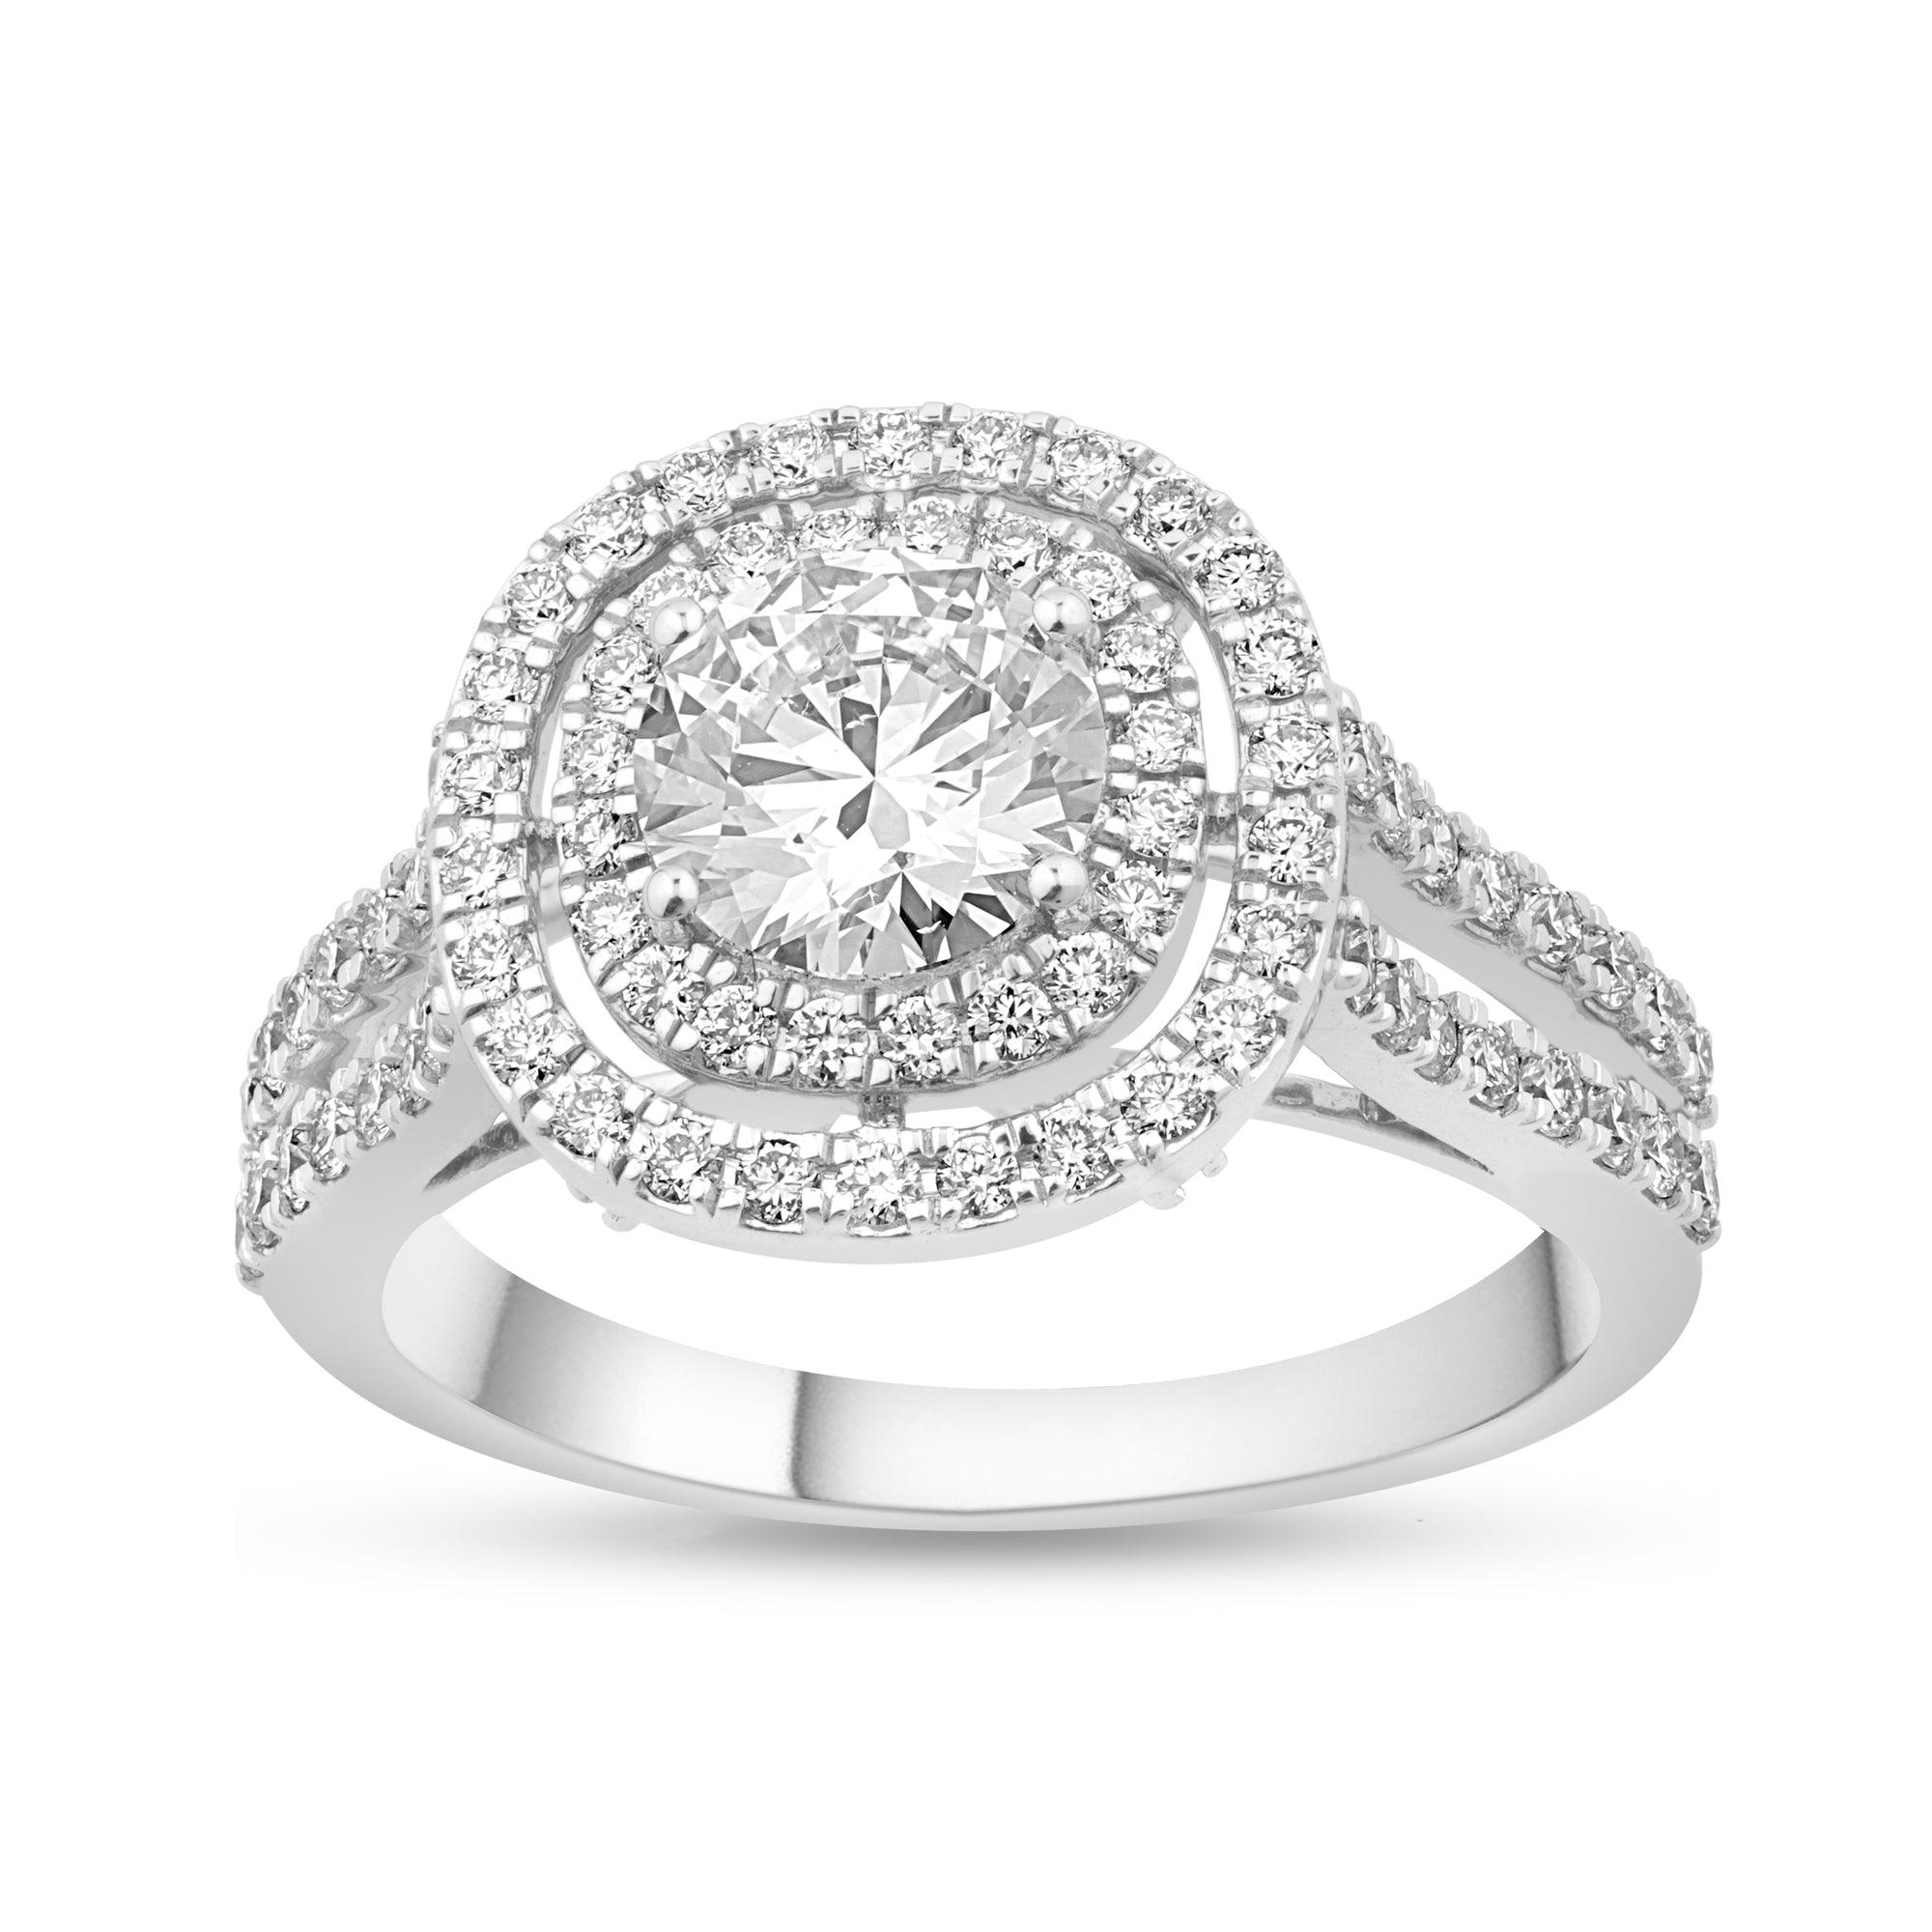 Chateau d'Amour 1.78ct TW - Harmony Bound